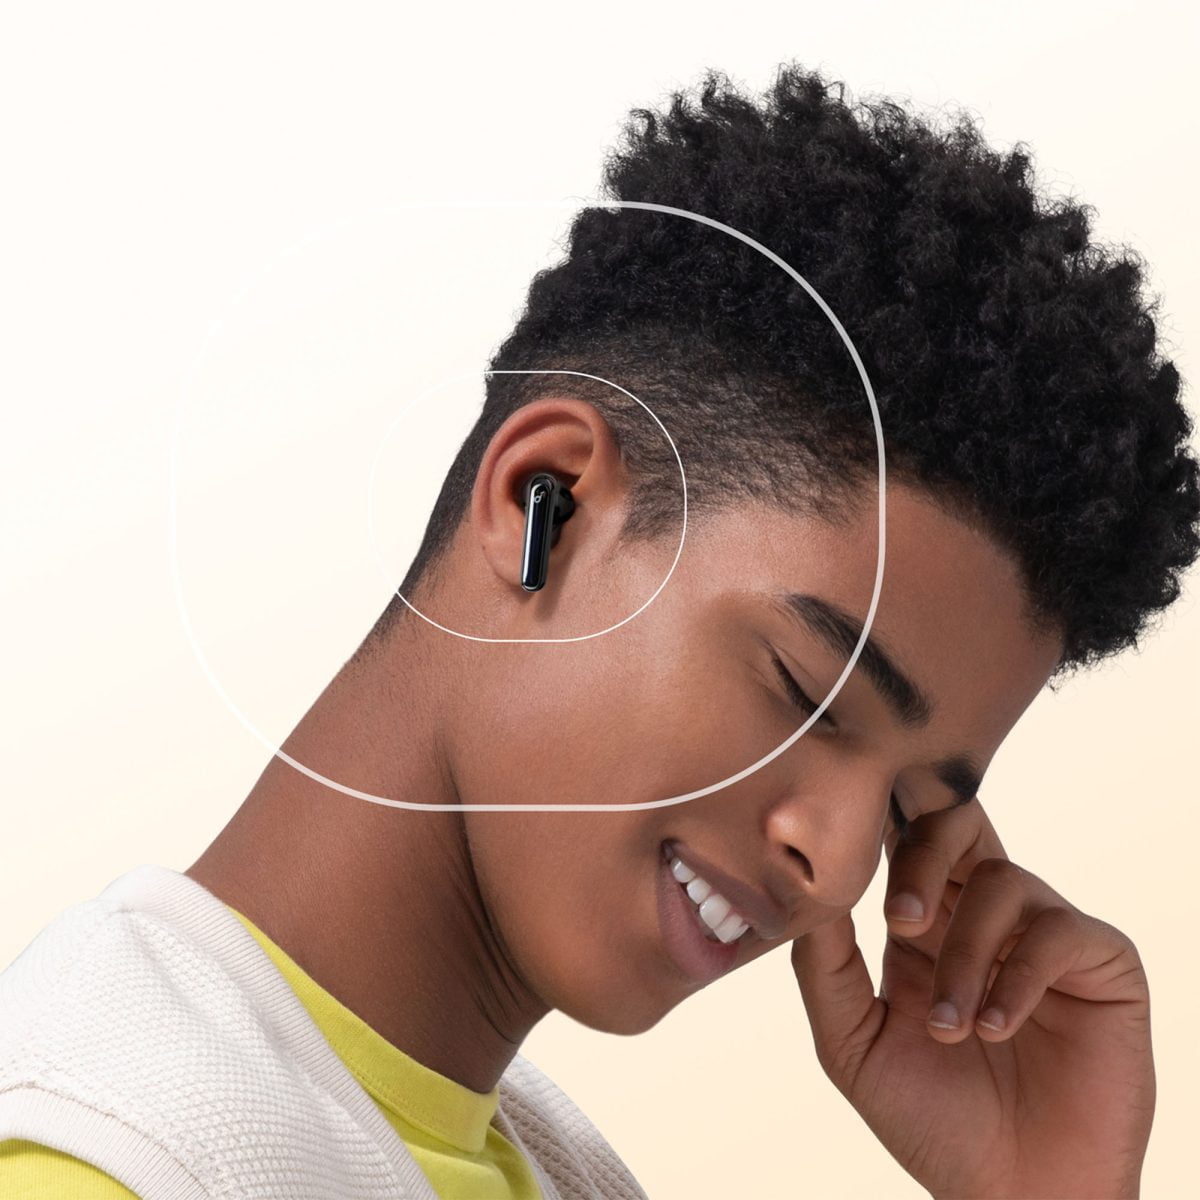 6476205Ld Soundcore &Lt;H1 Id=&Quot;Title&Quot; Class=&Quot;A-Size-Large A-Spacing-None&Quot;&Gt;Anker Soundcore Life Note 3 True Wireless Noise Cancelling Earbuds - Black&Lt;/H1&Gt; Enjoy Sound With Clear Treble And Powerful Bass That’s Enhanced In Real-Time By Bassup Technology. 3 Targeted Modes Are Individually Tailored To Cancel Out The Most Distracting Sounds In Each Environment. Voice Pickup Is Free From Background Noises Thanks To Life Note 3’S 6 Microphones That Use Soundcore’s Exclusive Algorithm To Enhance Call Quality. Get 7 Hours From A Single Charge And Up To 35 Hours With The Charging Case. Choose From The Variety Of Included Eartips To Find A Fit That’s Perfect For Your Ears. Life Note 3’S Ergonomic Design Fits In Your Ear Comfortably And Remains Stable Even When Listening On The Move. Enhances And Emphasizes The Sound Of Footsteps, Gunfire, And More For A More Immersive Playing Experience. &Lt;Pre&Gt;Anker Product Warranty&Lt;/Pre&Gt; &Lt;Pre&Gt;&Lt;B&Gt;We Also Provide International Wholesale And Retail Shipping To All Gcc Countries: Saudi Arabia, Qatar, Oman, Kuwait, Bahrain.&Lt;/B&Gt;&Lt;/Pre&Gt; Earbuds Anker Soundcore Life Note 3 Earbuds - Black A3933H11